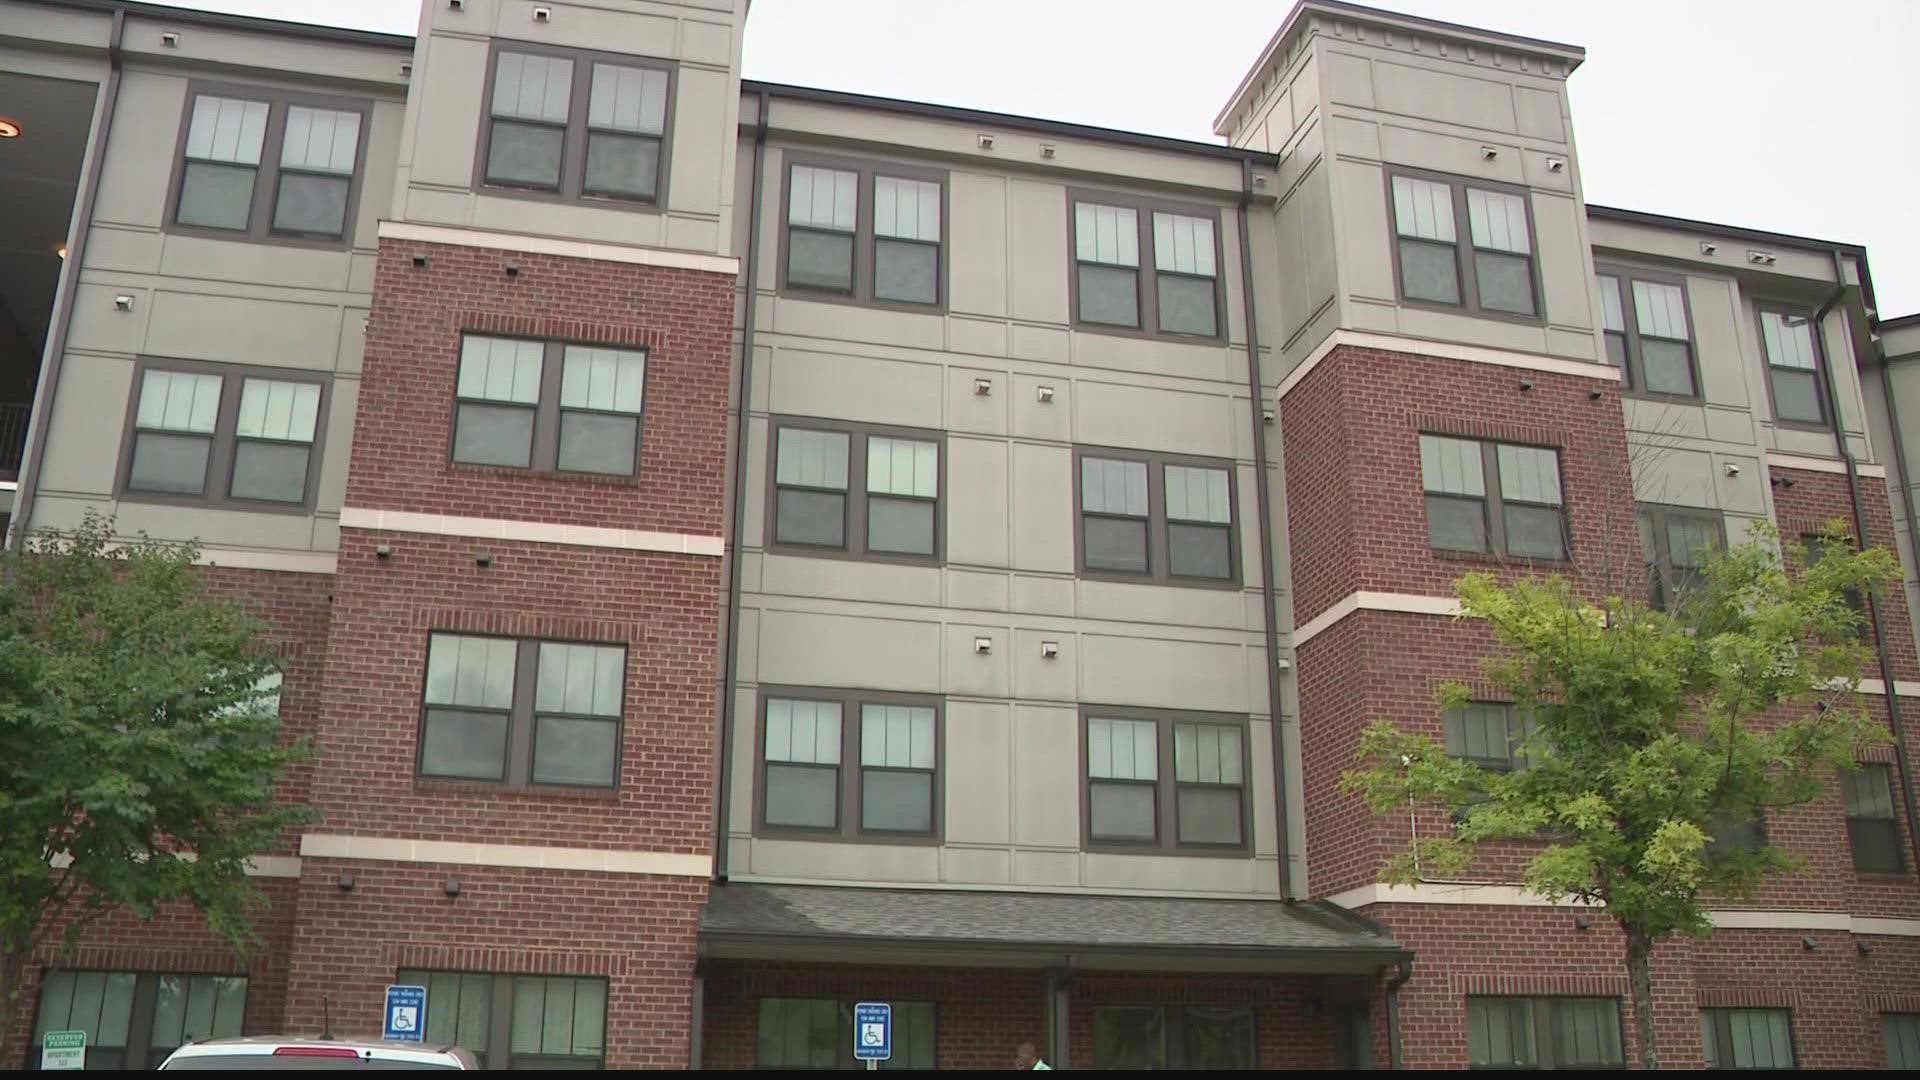 Residents of an East Point apartment complex found out this week that their very own front door can be unlocked by their neighbors' keys.